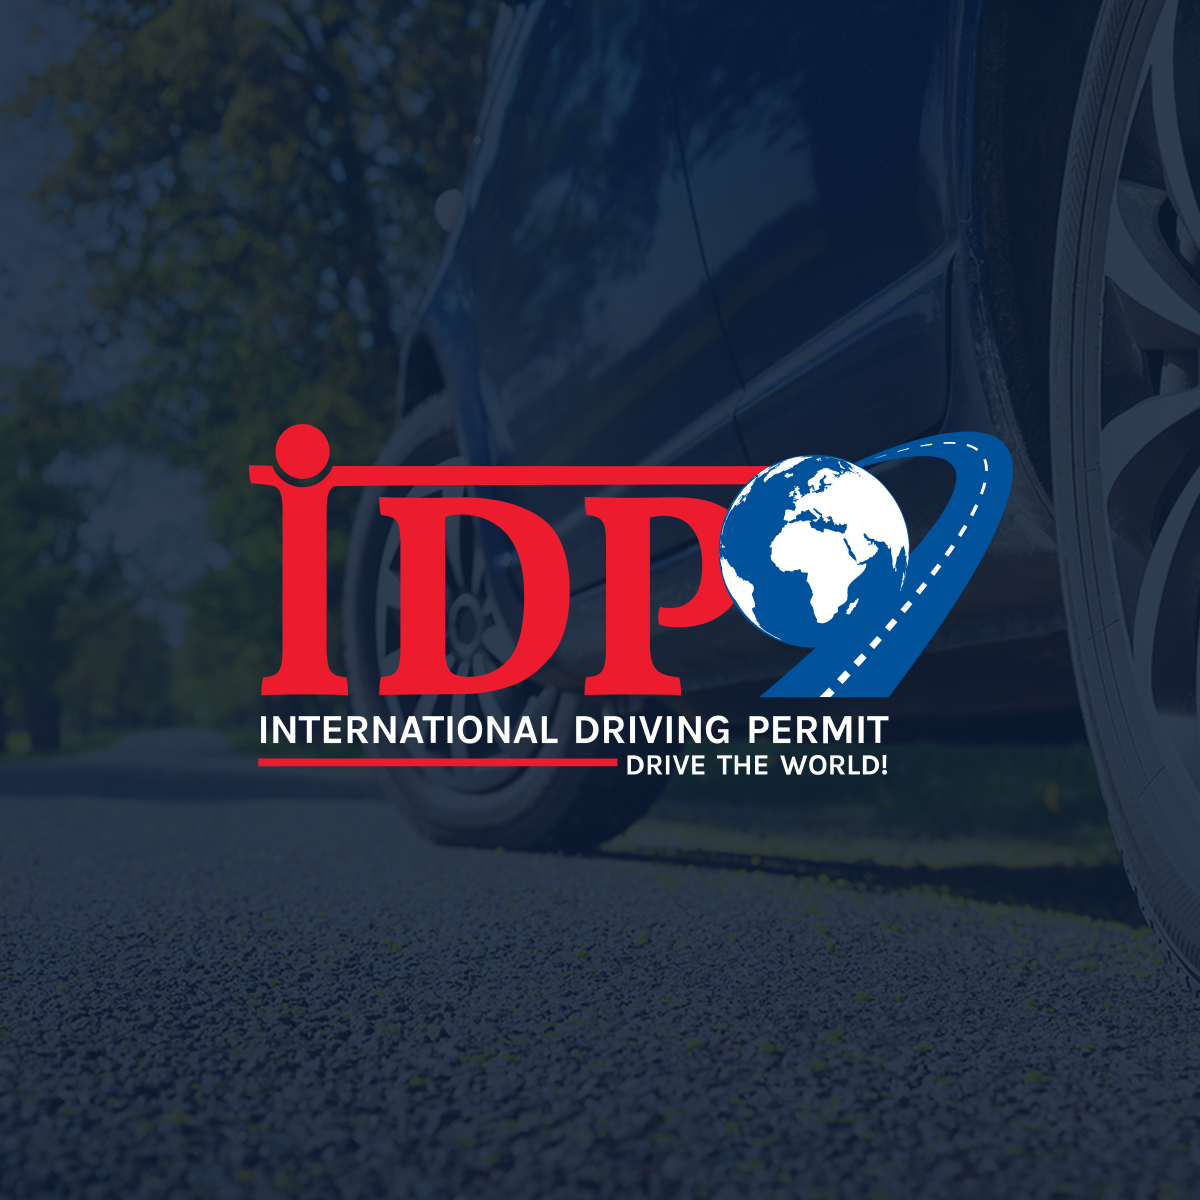 can you drive in us with international license